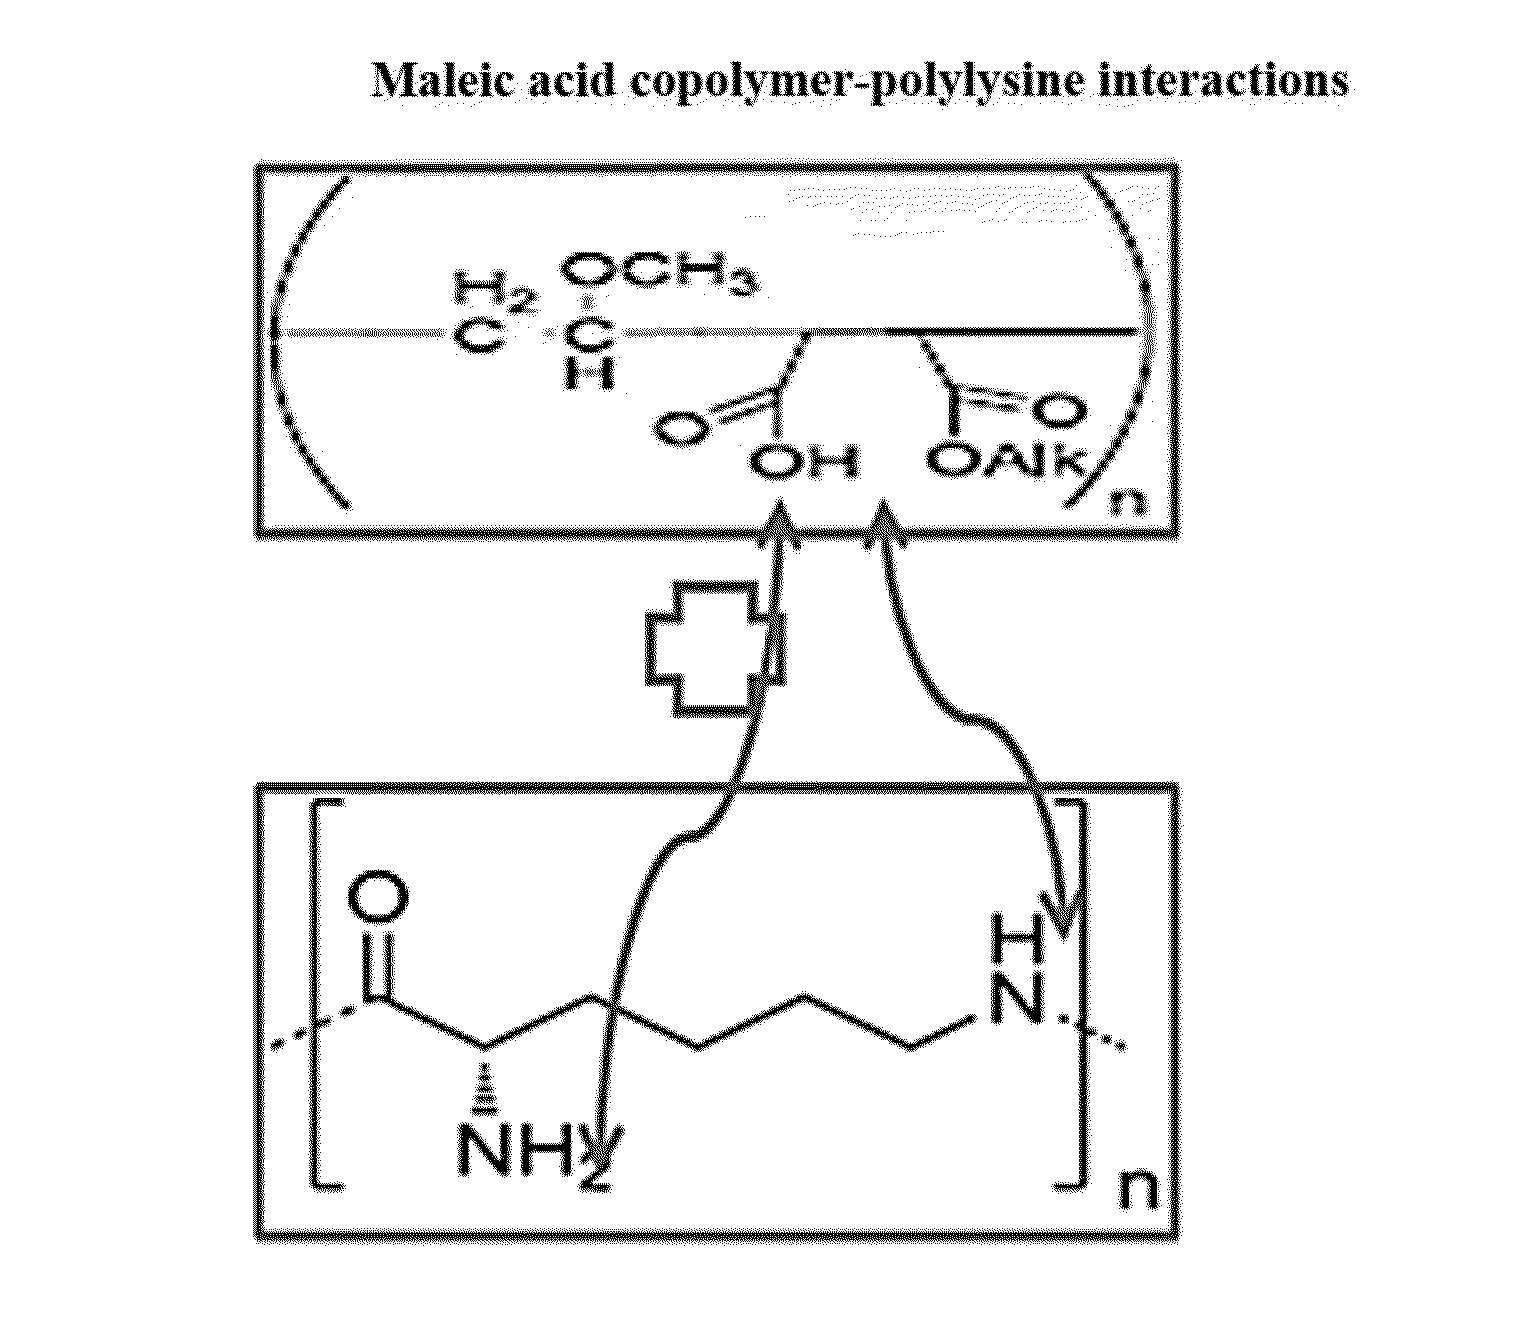 Hair cosmetic and styling compositions based on maleic acid copolymers and polyamines